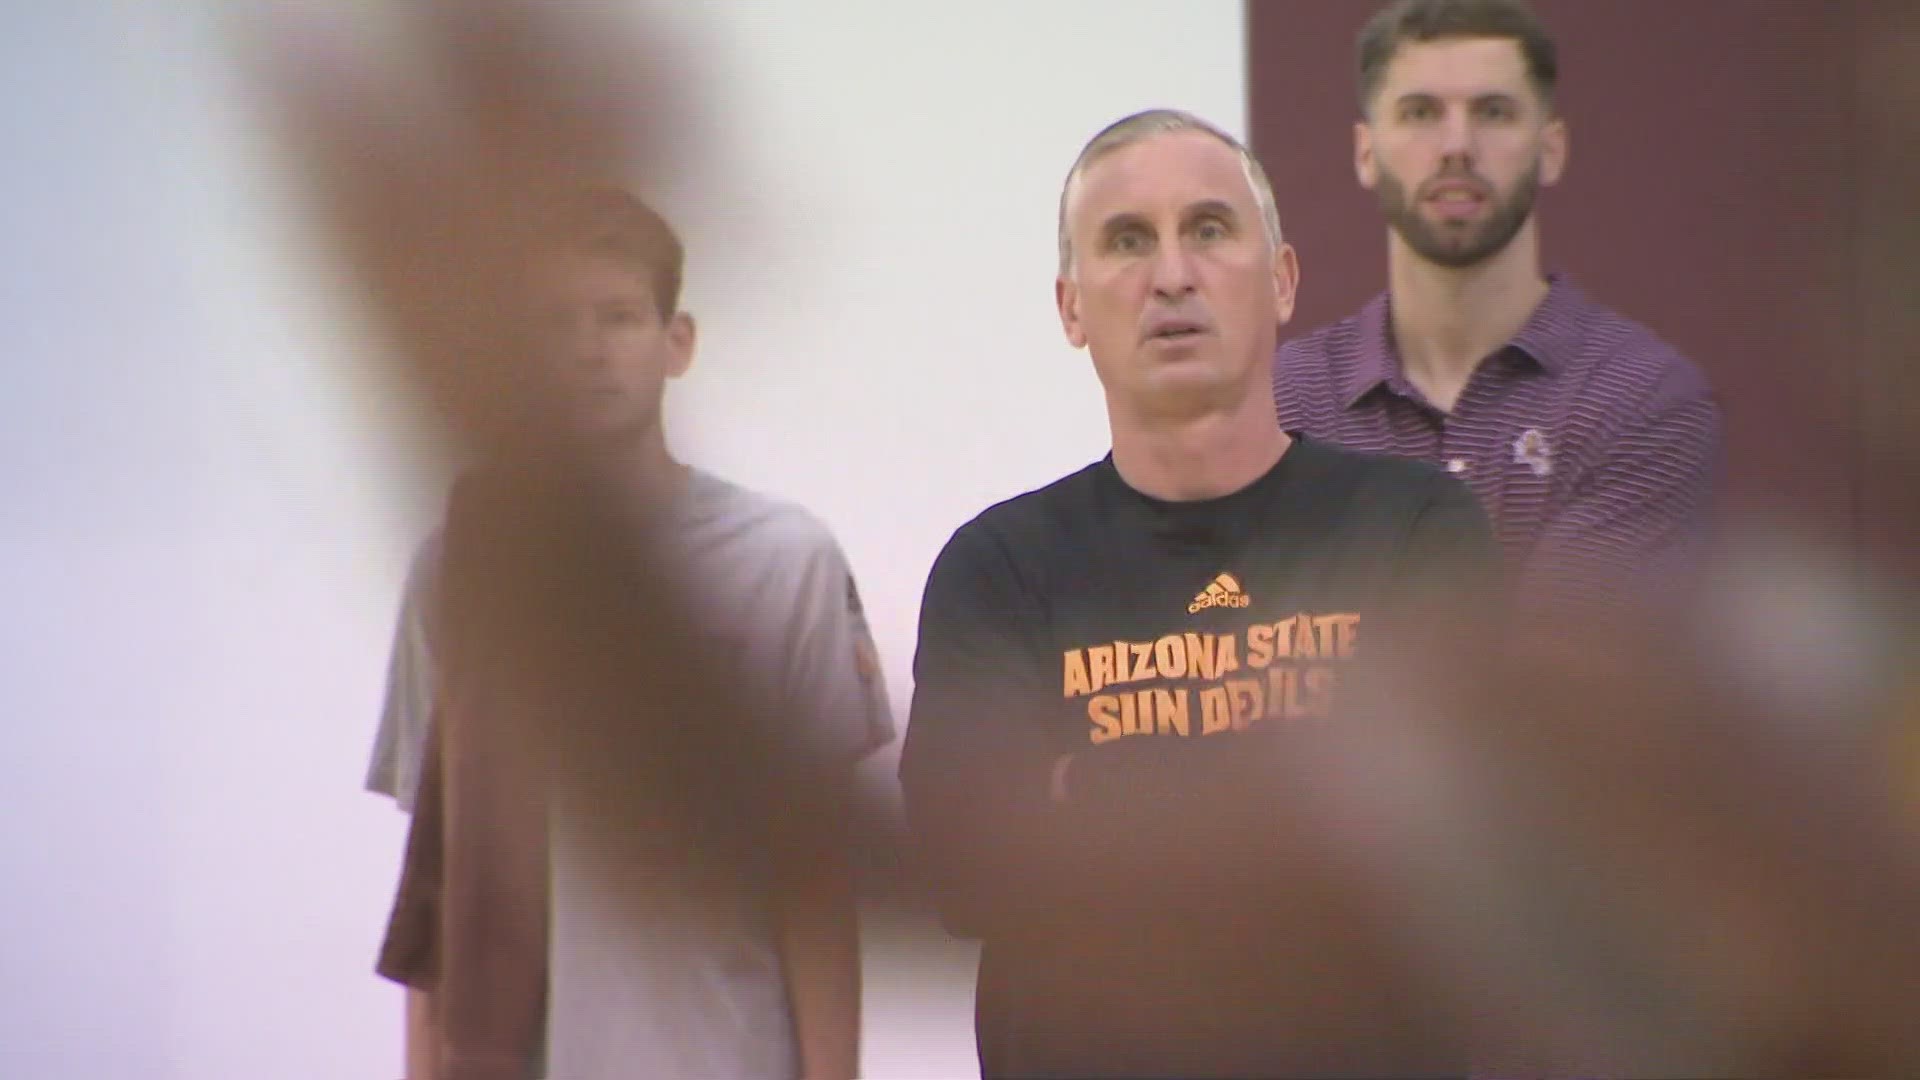 Hurley signed a 2-year extension just days after being eliminated from the NCAA Tournament and says he hopes to continue building ASU into a contender